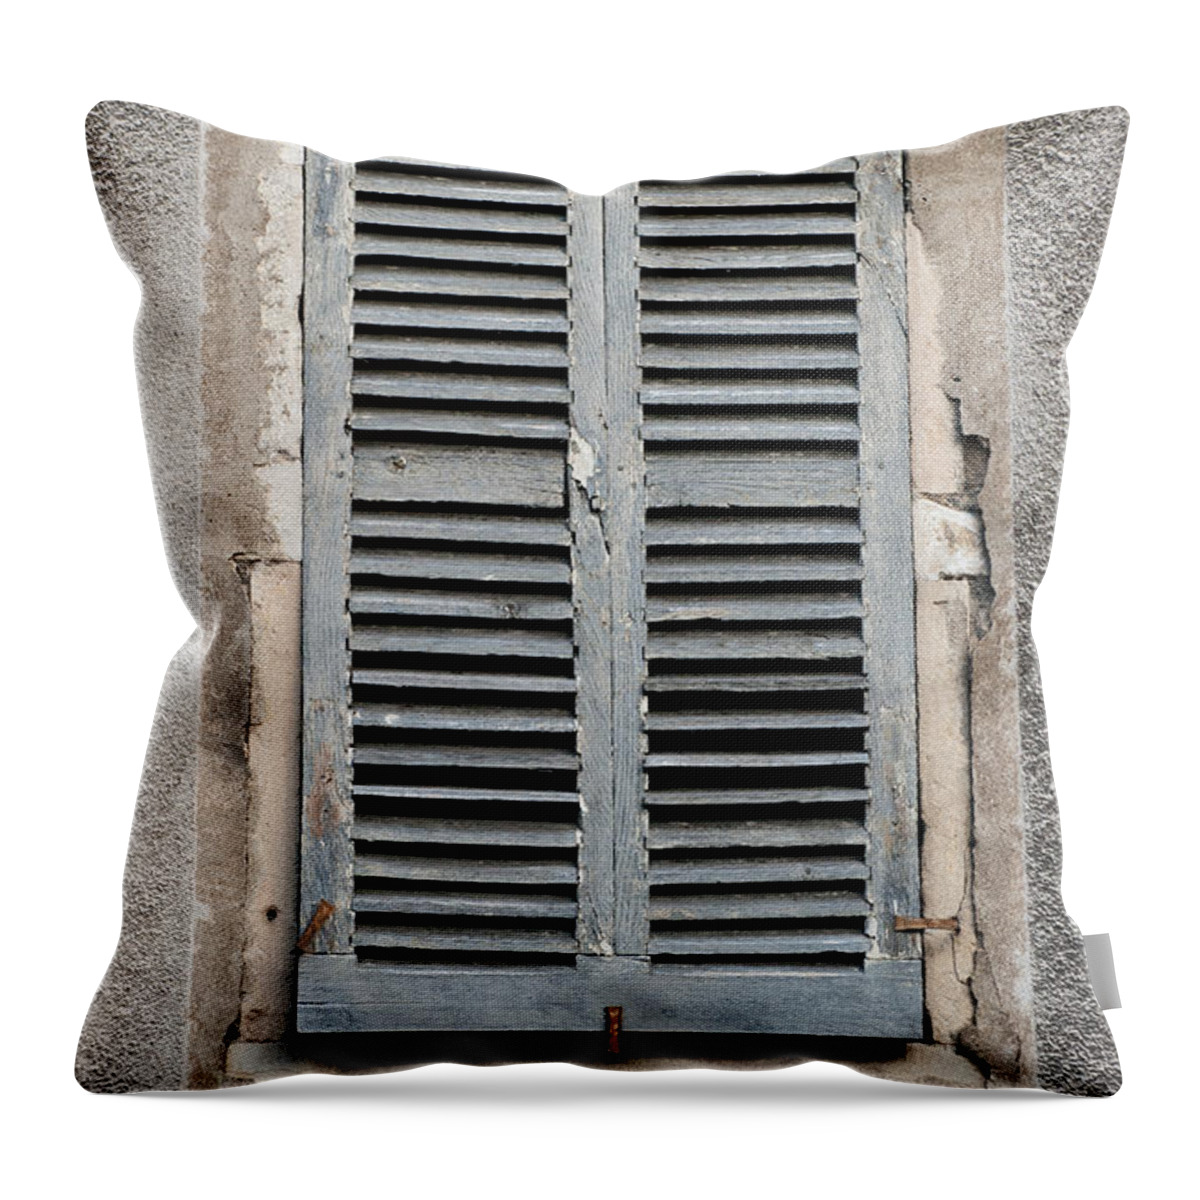 Rustic Throw Pillow featuring the photograph Rustic French Window Shutters Vignette by Jani Freimann